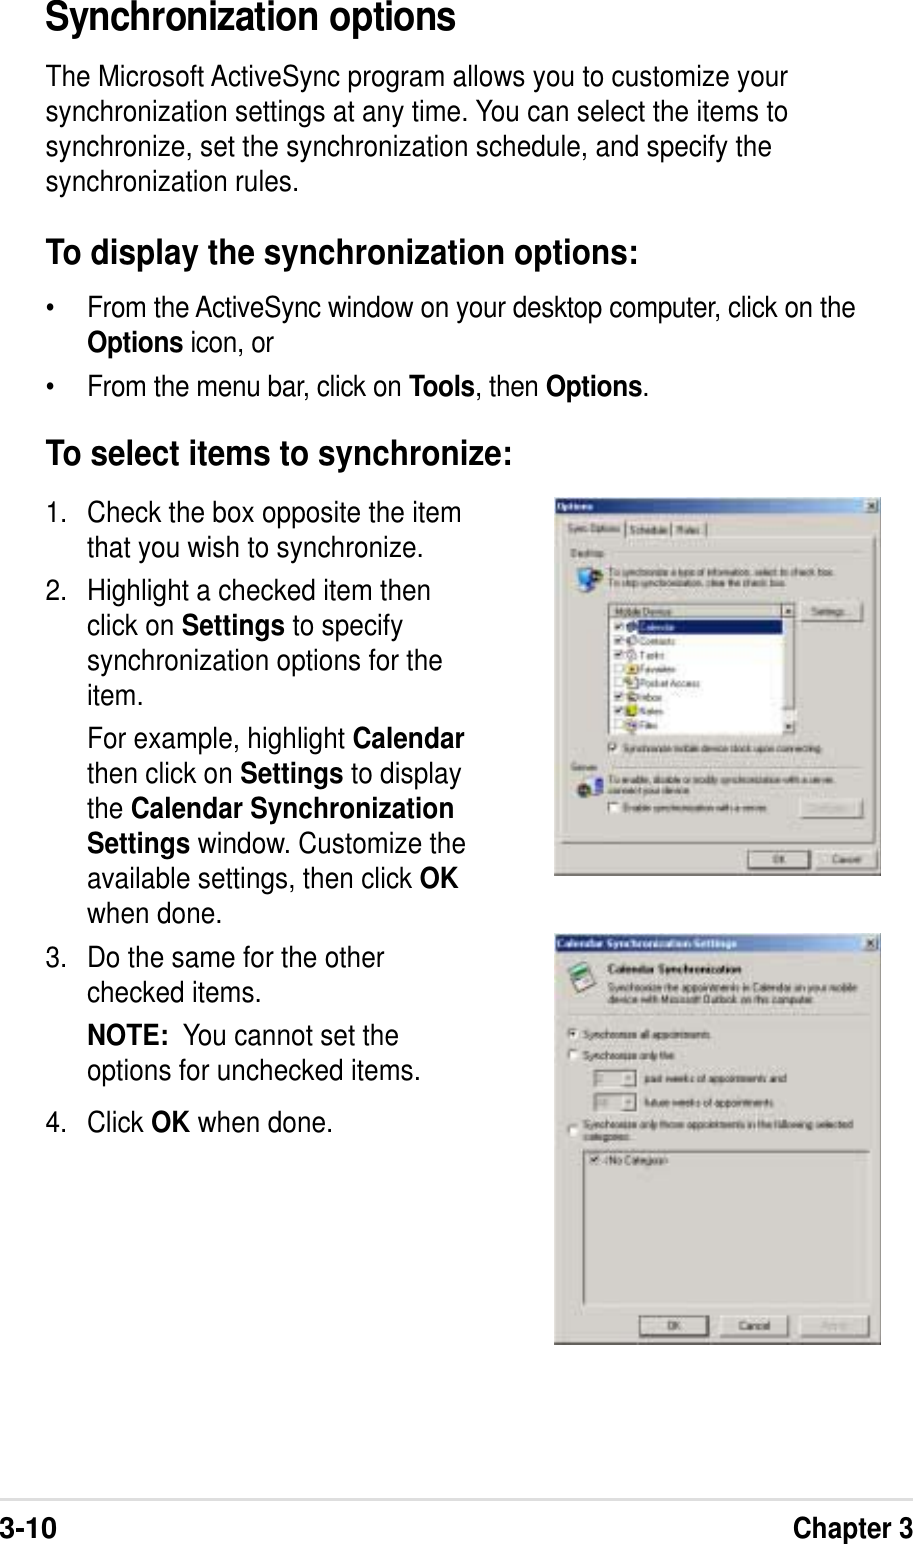 3-10Chapter 3Synchronization optionsThe Microsoft ActiveSync program allows you to customize yoursynchronization settings at any time. You can select the items tosynchronize, set the synchronization schedule, and specify thesynchronization rules.To display the synchronization options:• From the ActiveSync window on your desktop computer, click on theOptions icon, or• From the menu bar, click on Tools, then Options.1. Check the box opposite the itemthat you wish to synchronize.2. Highlight a checked item thenclick on Settings to specifysynchronization options for theitem.For example, highlight Calendarthen click on Settings to displaythe Calendar SynchronizationSettings window. Customize theavailable settings, then click OKwhen done.3. Do the same for the otherchecked items.NOTE:  You cannot set theoptions for unchecked items.4. Click OK when done.To select items to synchronize: